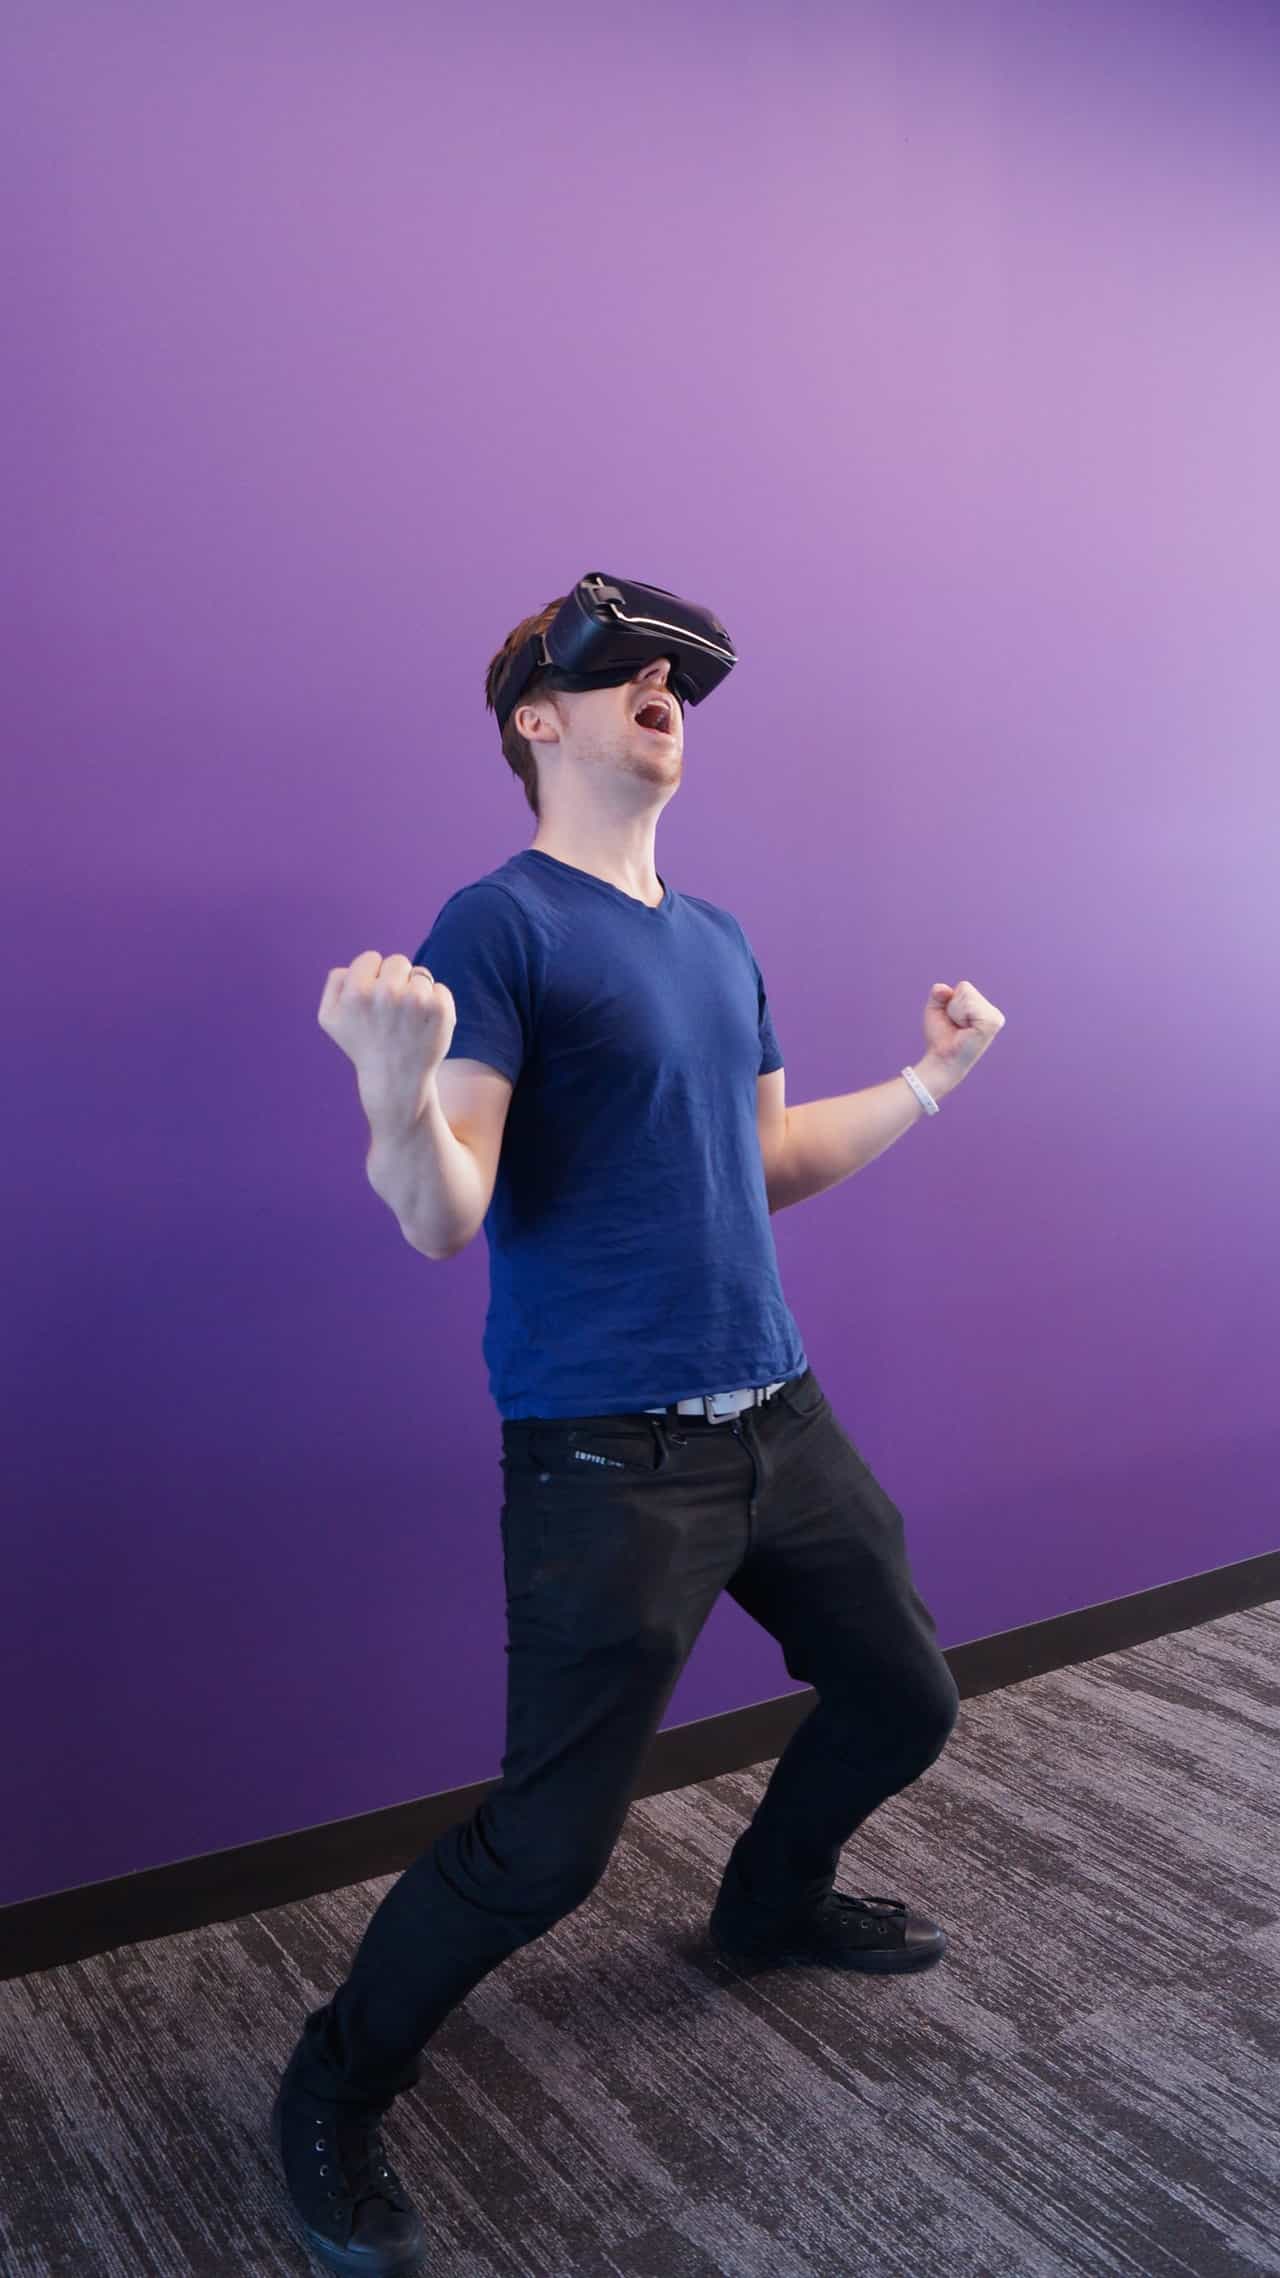 How to Market Your Virtual Reality App: What You Need to Know